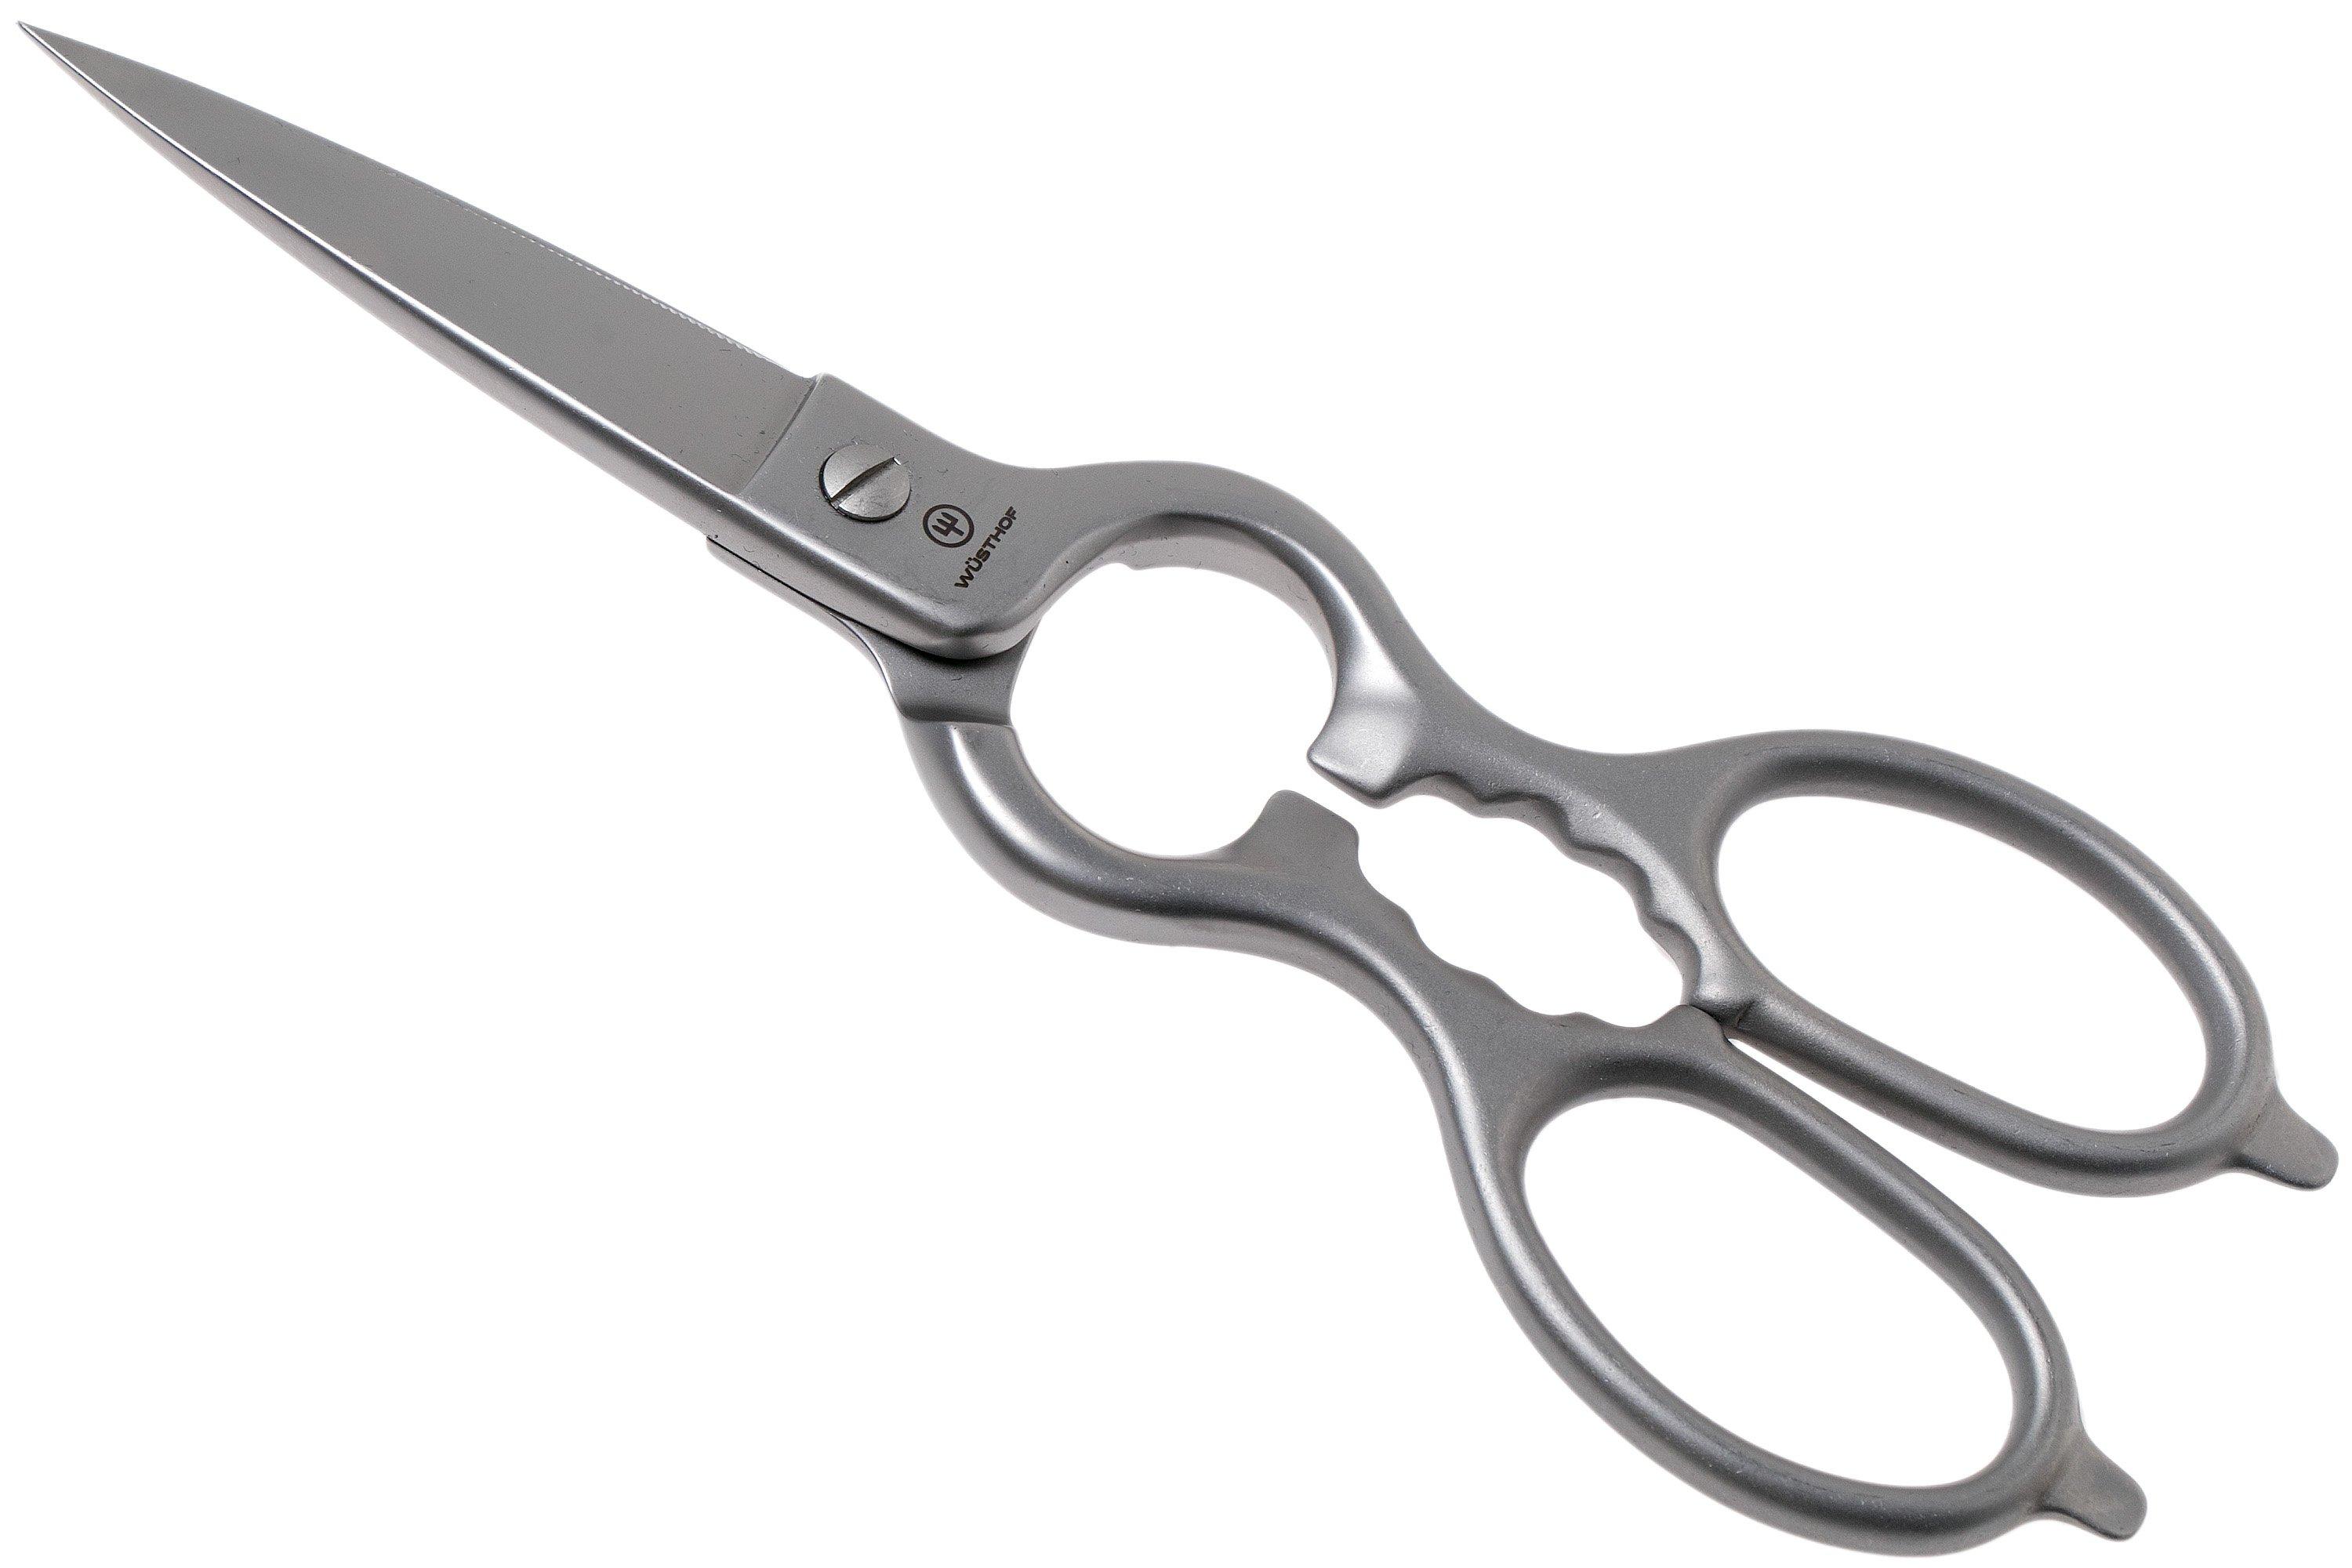 Wüsthof 1059594901 Kitchen Scissors Stainless Steel Advantageously Shopping At Knivesandtools